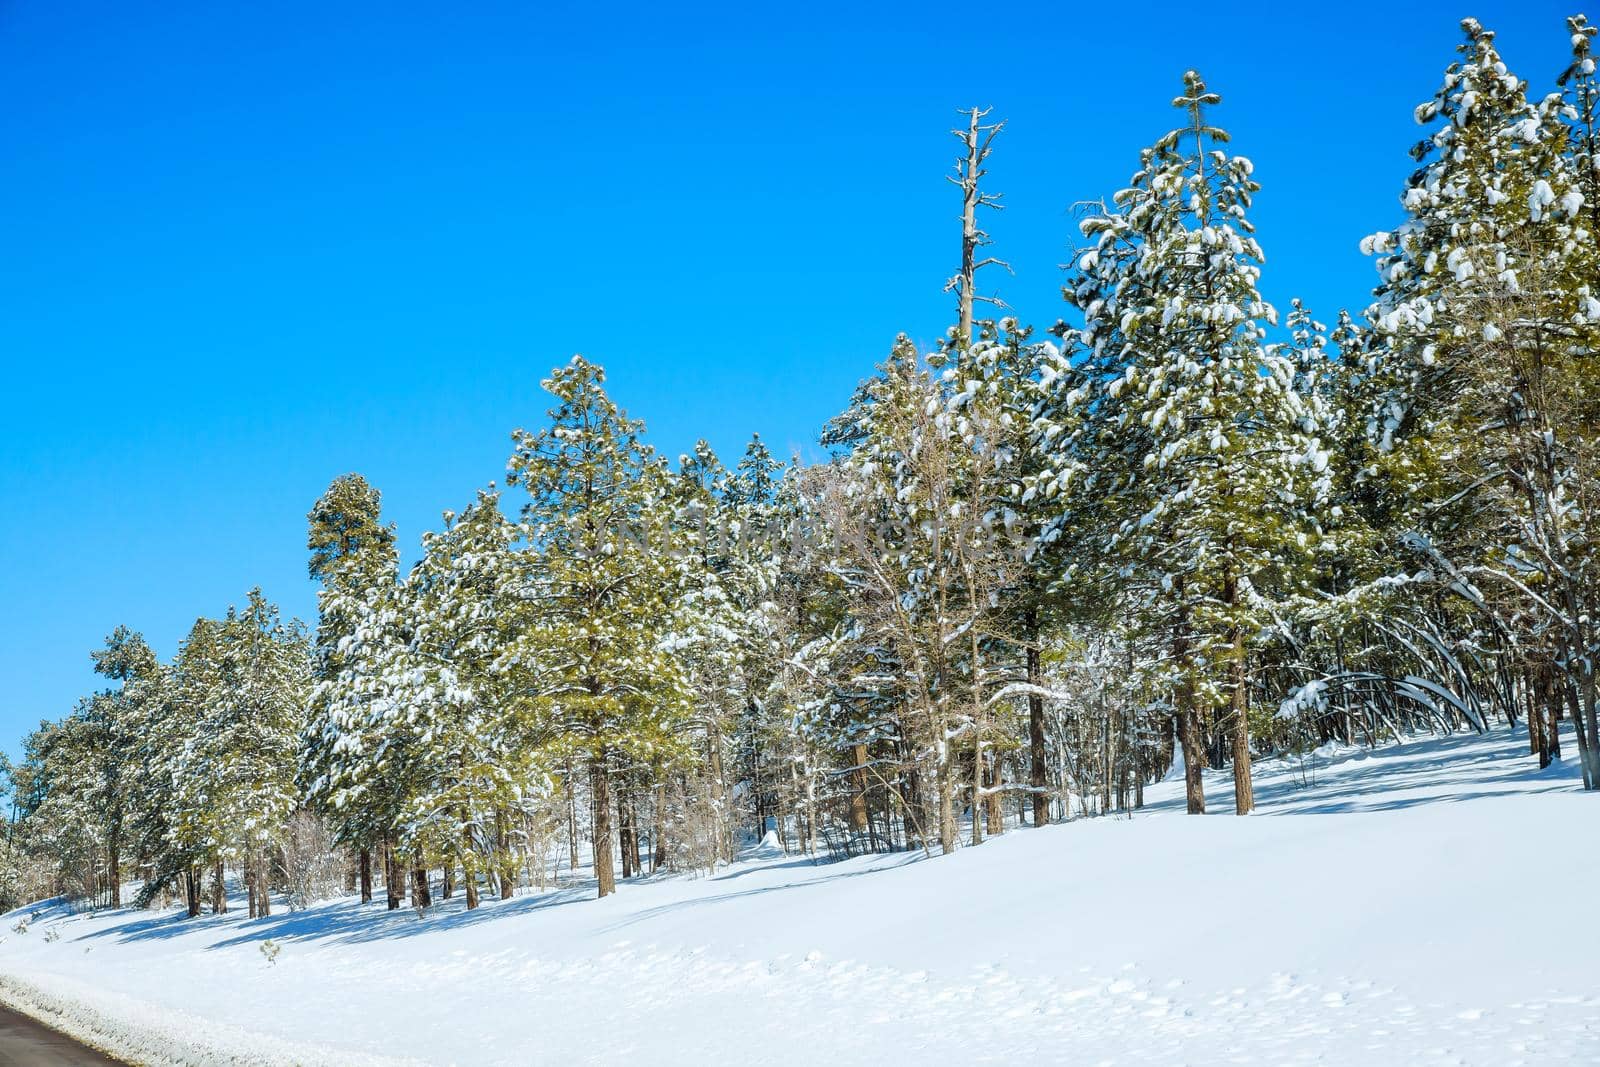 Panorama in Arizona landscape winter season mountains of trees covered snow